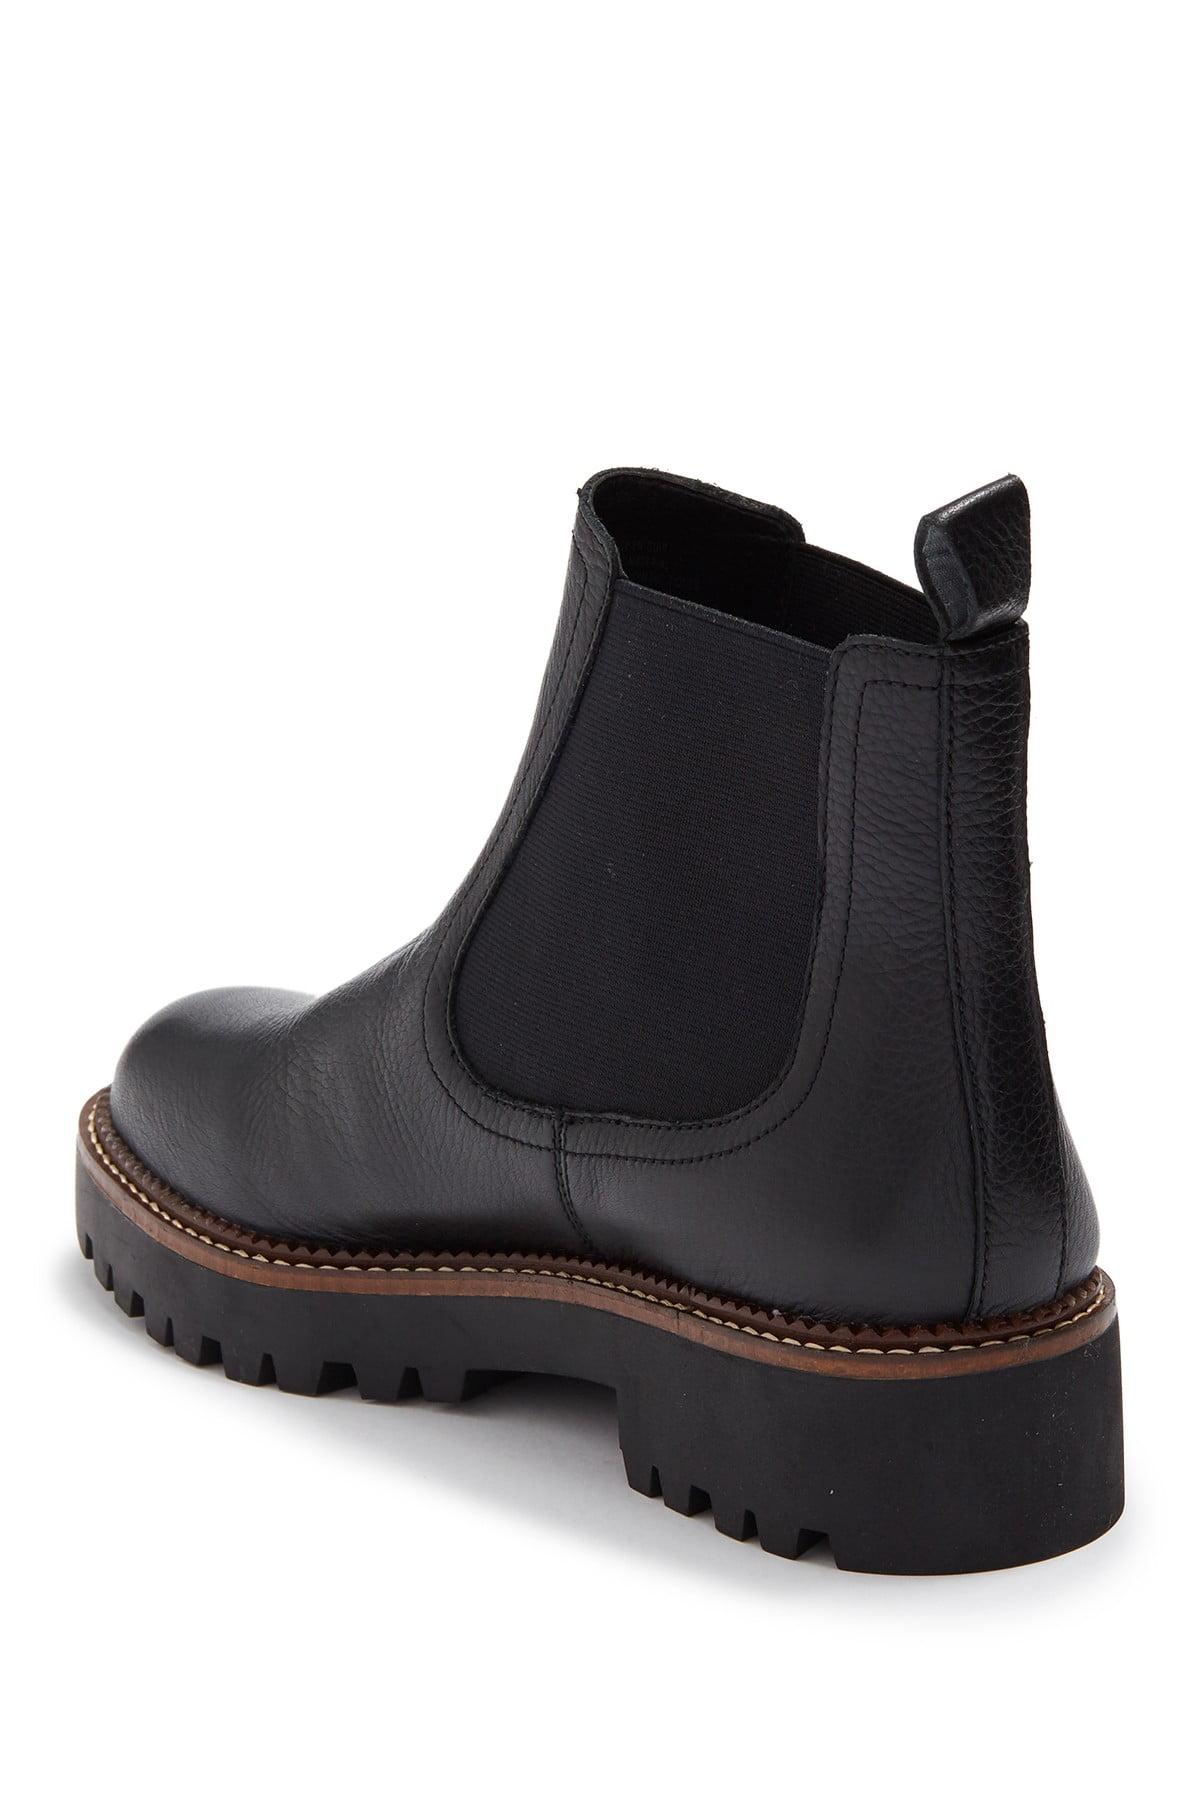 Caslon Miller Water Resistant Leather Chelsea Boot in Black - Lyst